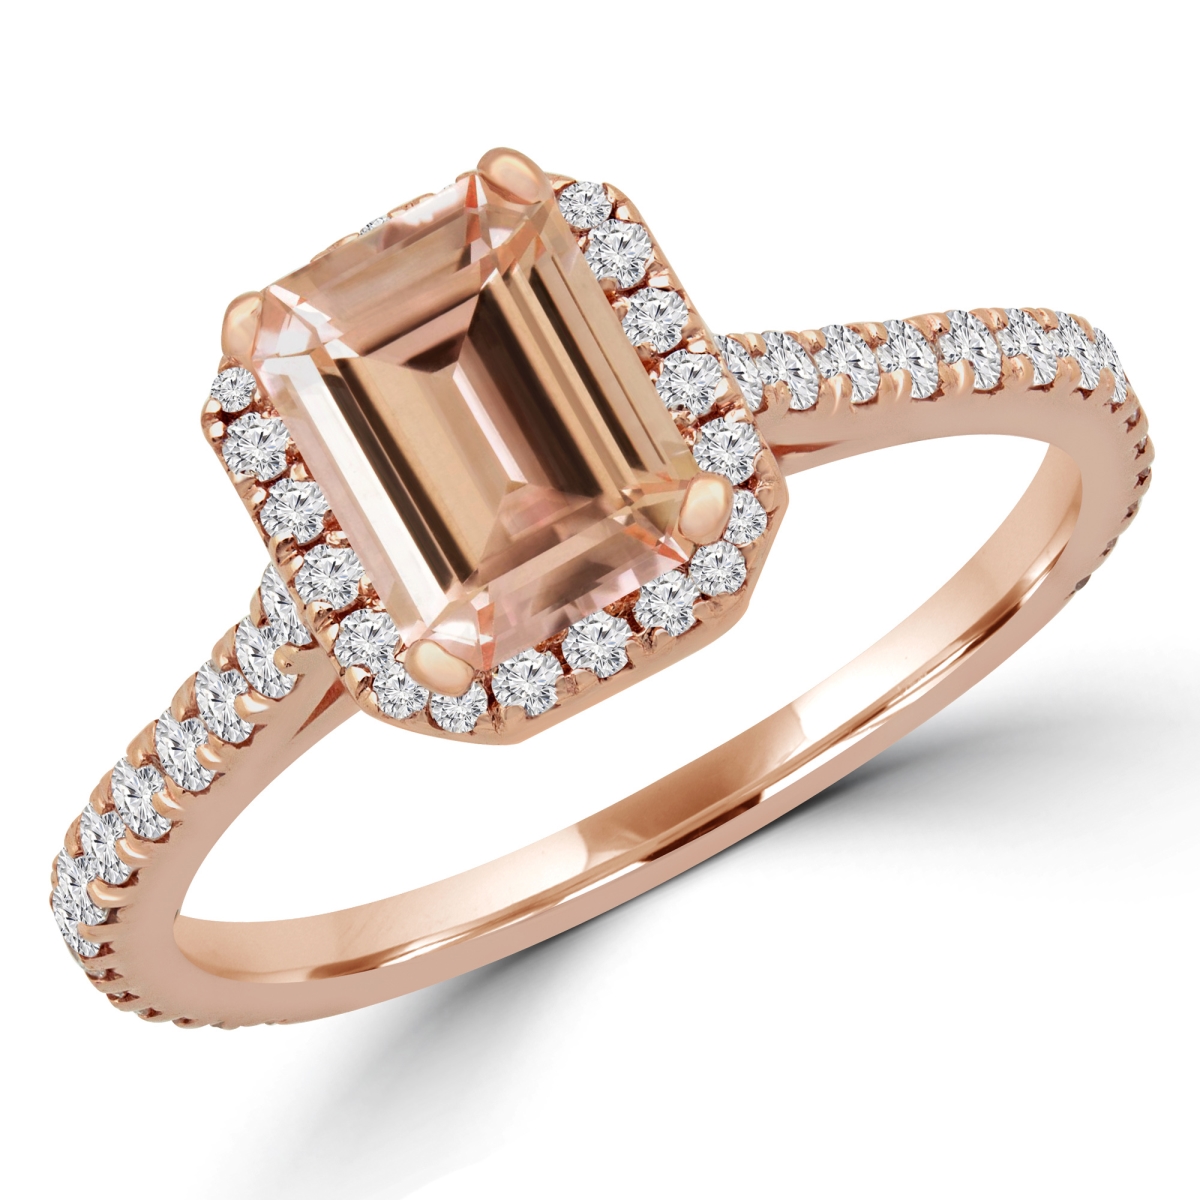 Picture of Majesty Diamonds MD180580-4.5 1.25 CTW Emerald Pink Morganite Halo Engagement Ring in 14K Rose Gold - Size 4.5